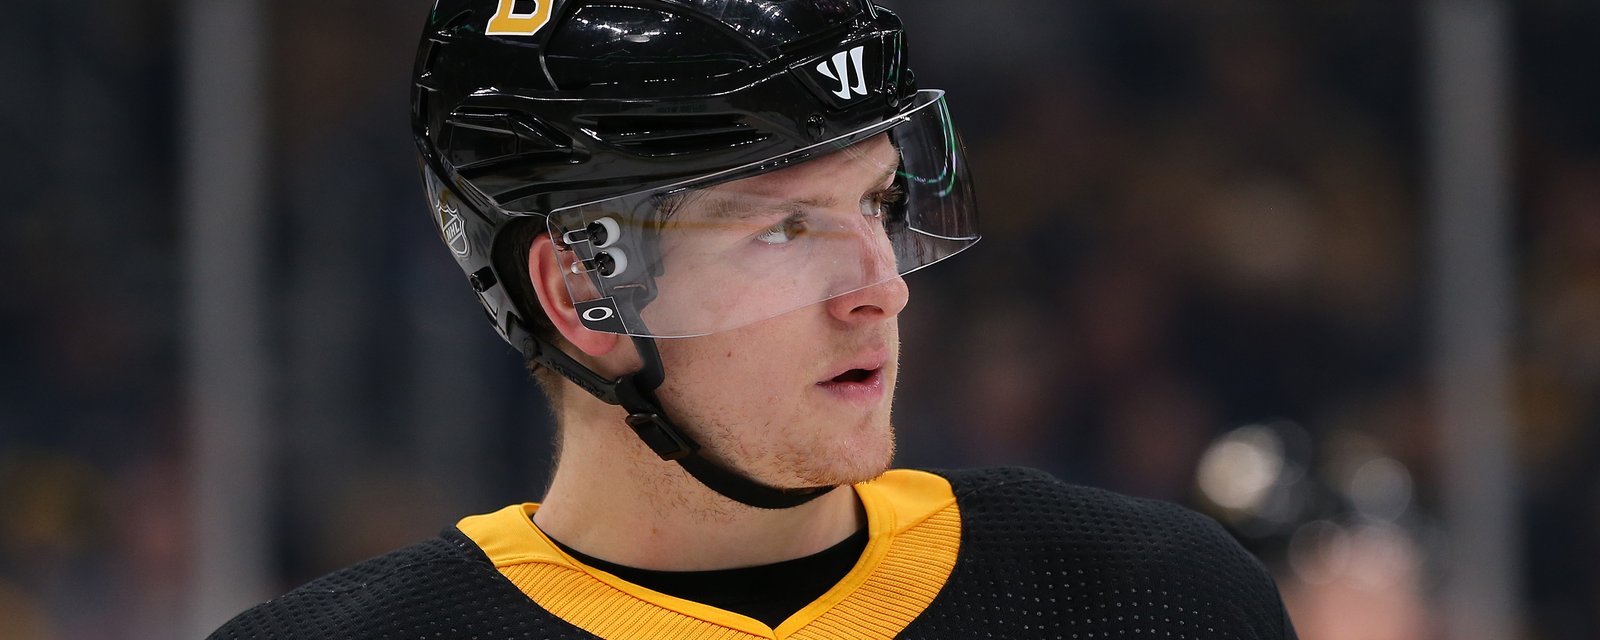 Bruins' GM Sweeney chimes in on the situation with Torey Krug